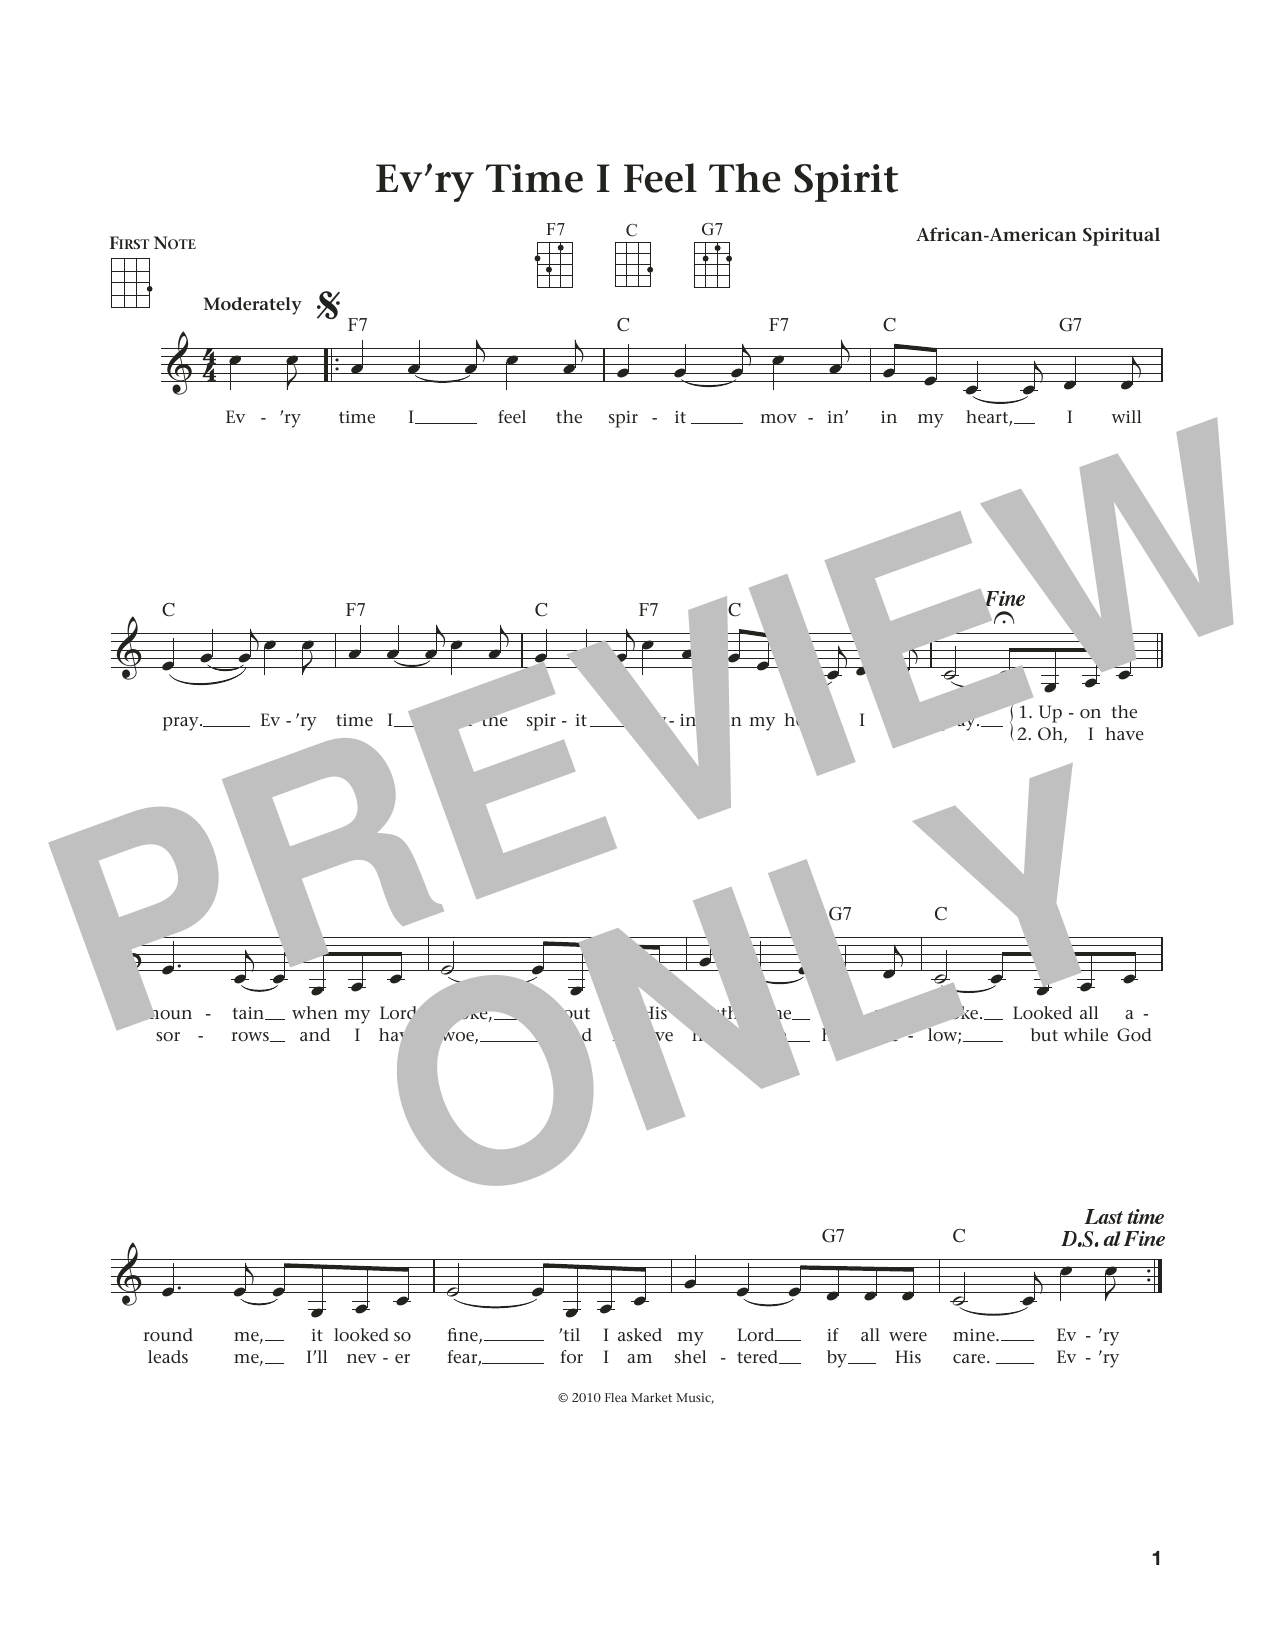 Download African-American Spiritual Every Time I Feel The Spirit (from The Sheet Music